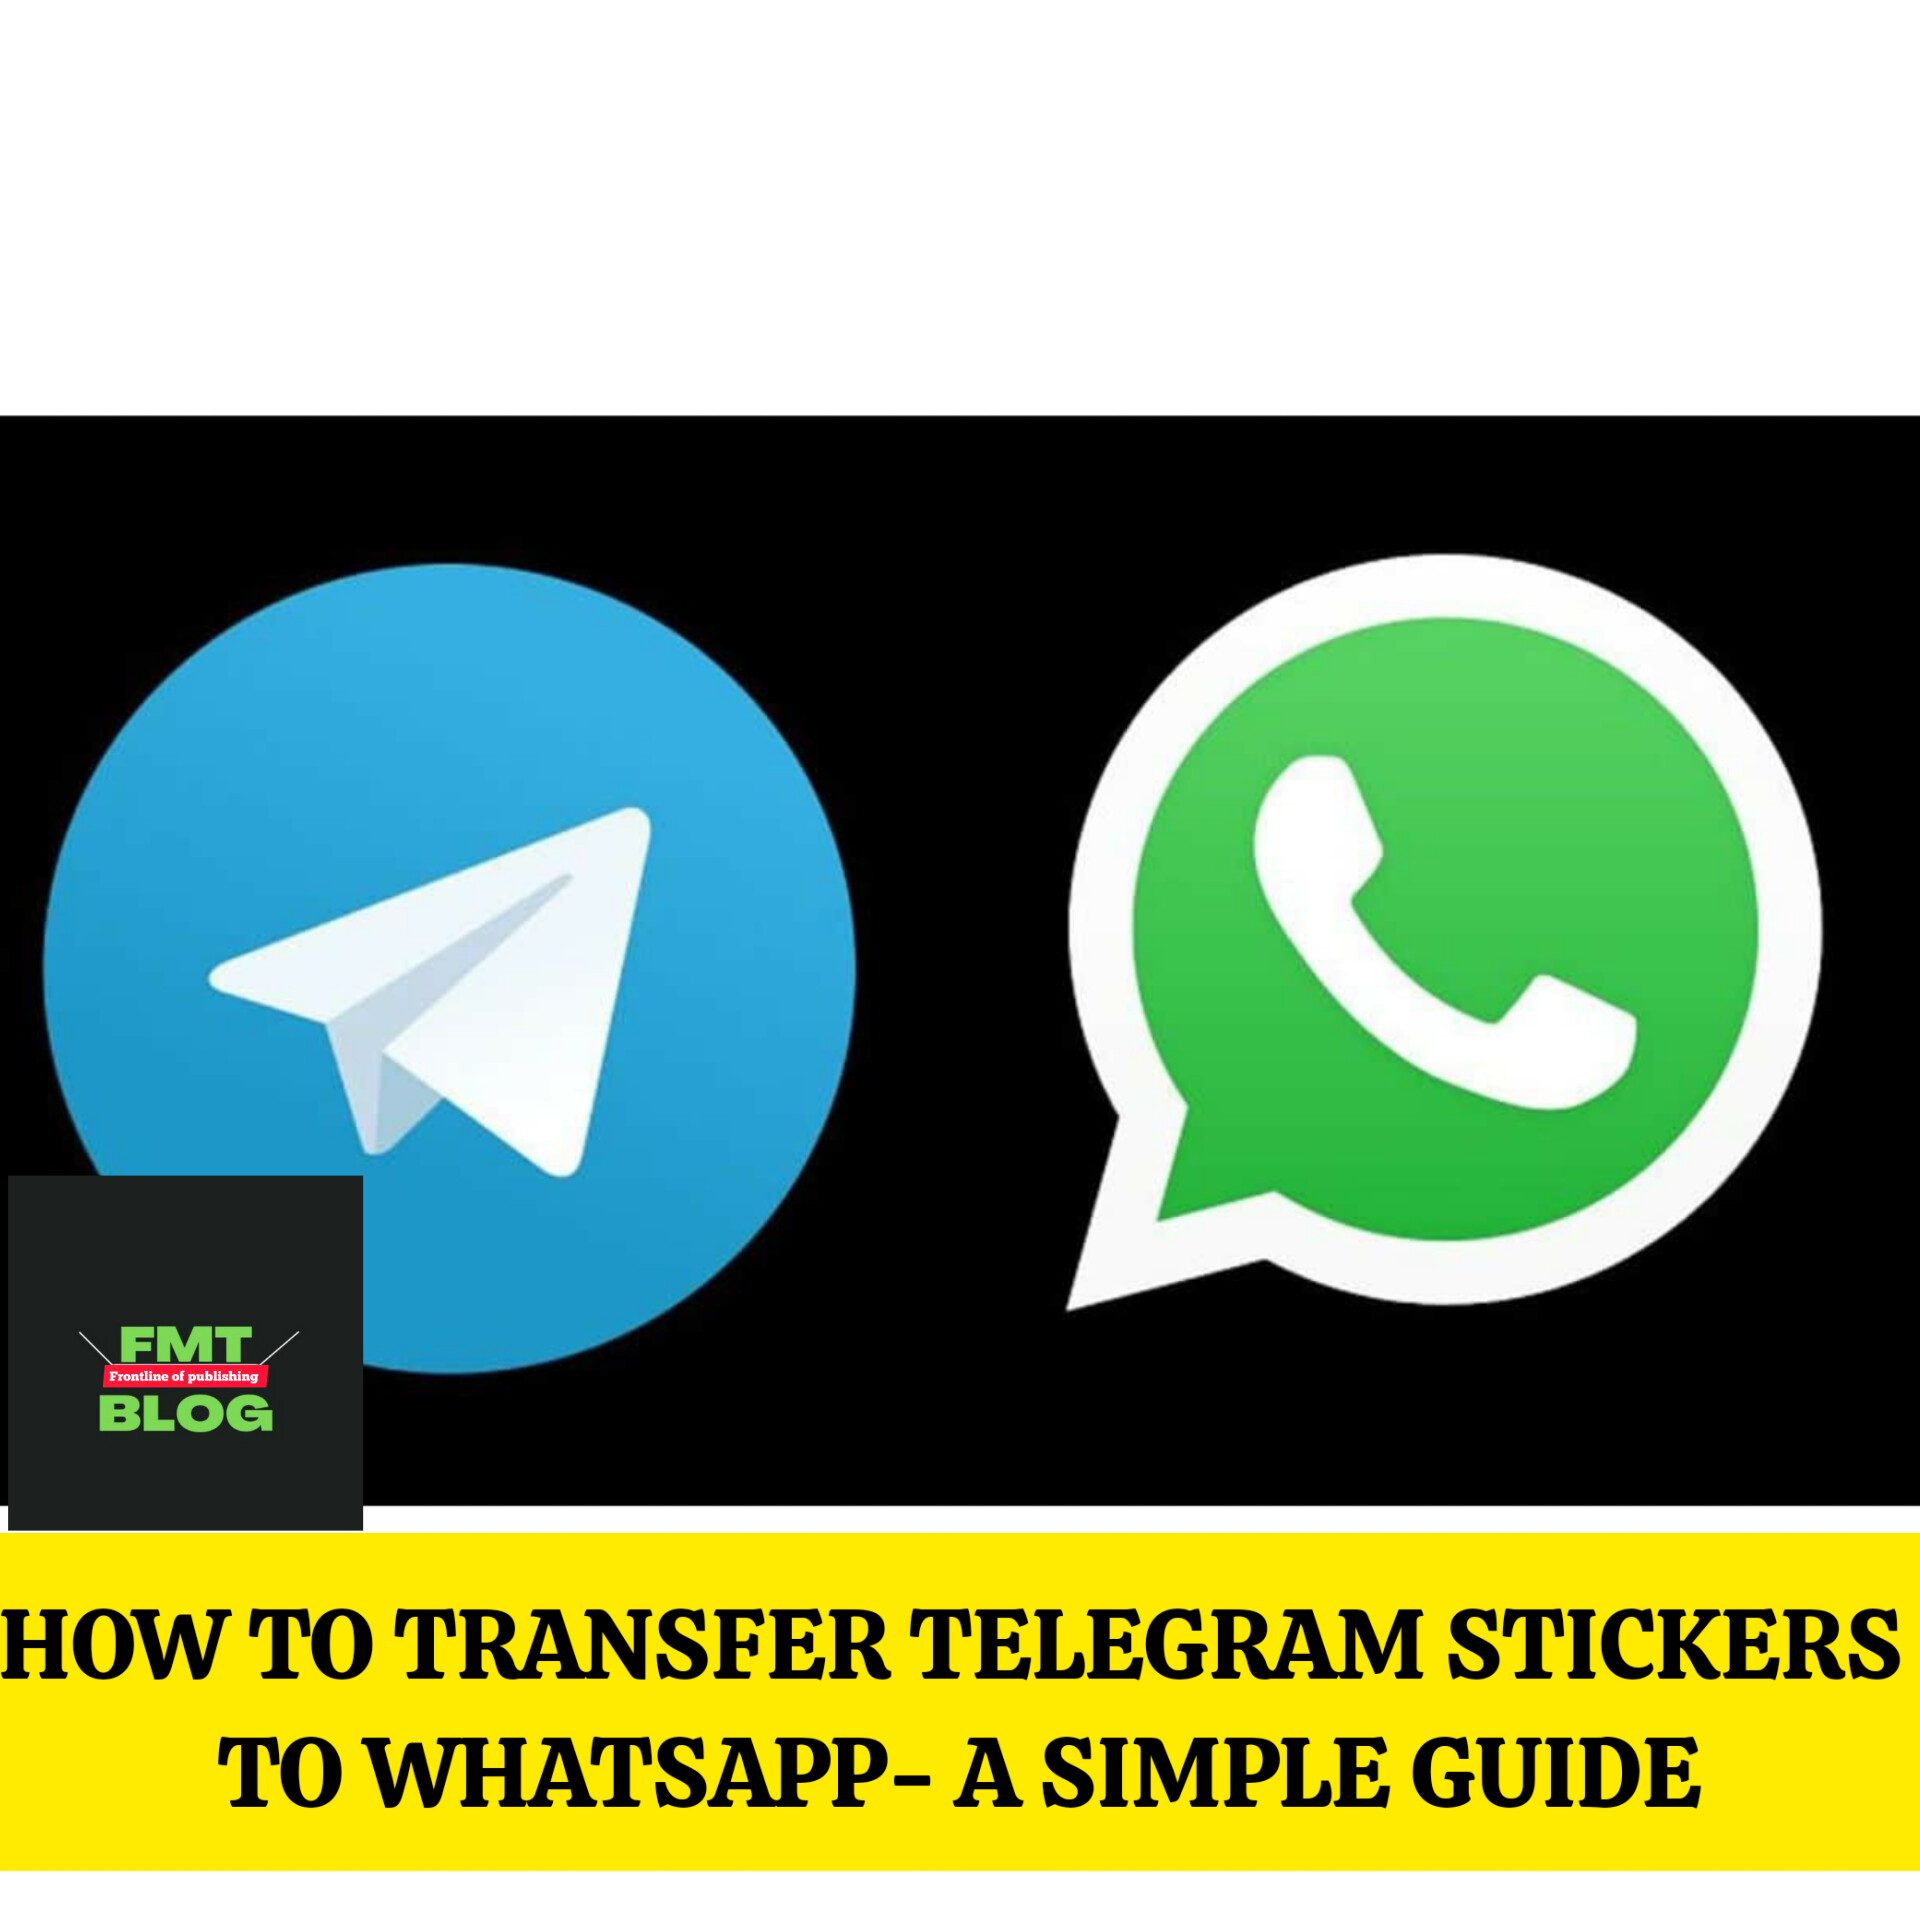 How to transfer Telegram stickers to WhatsApp- A Simple Guide